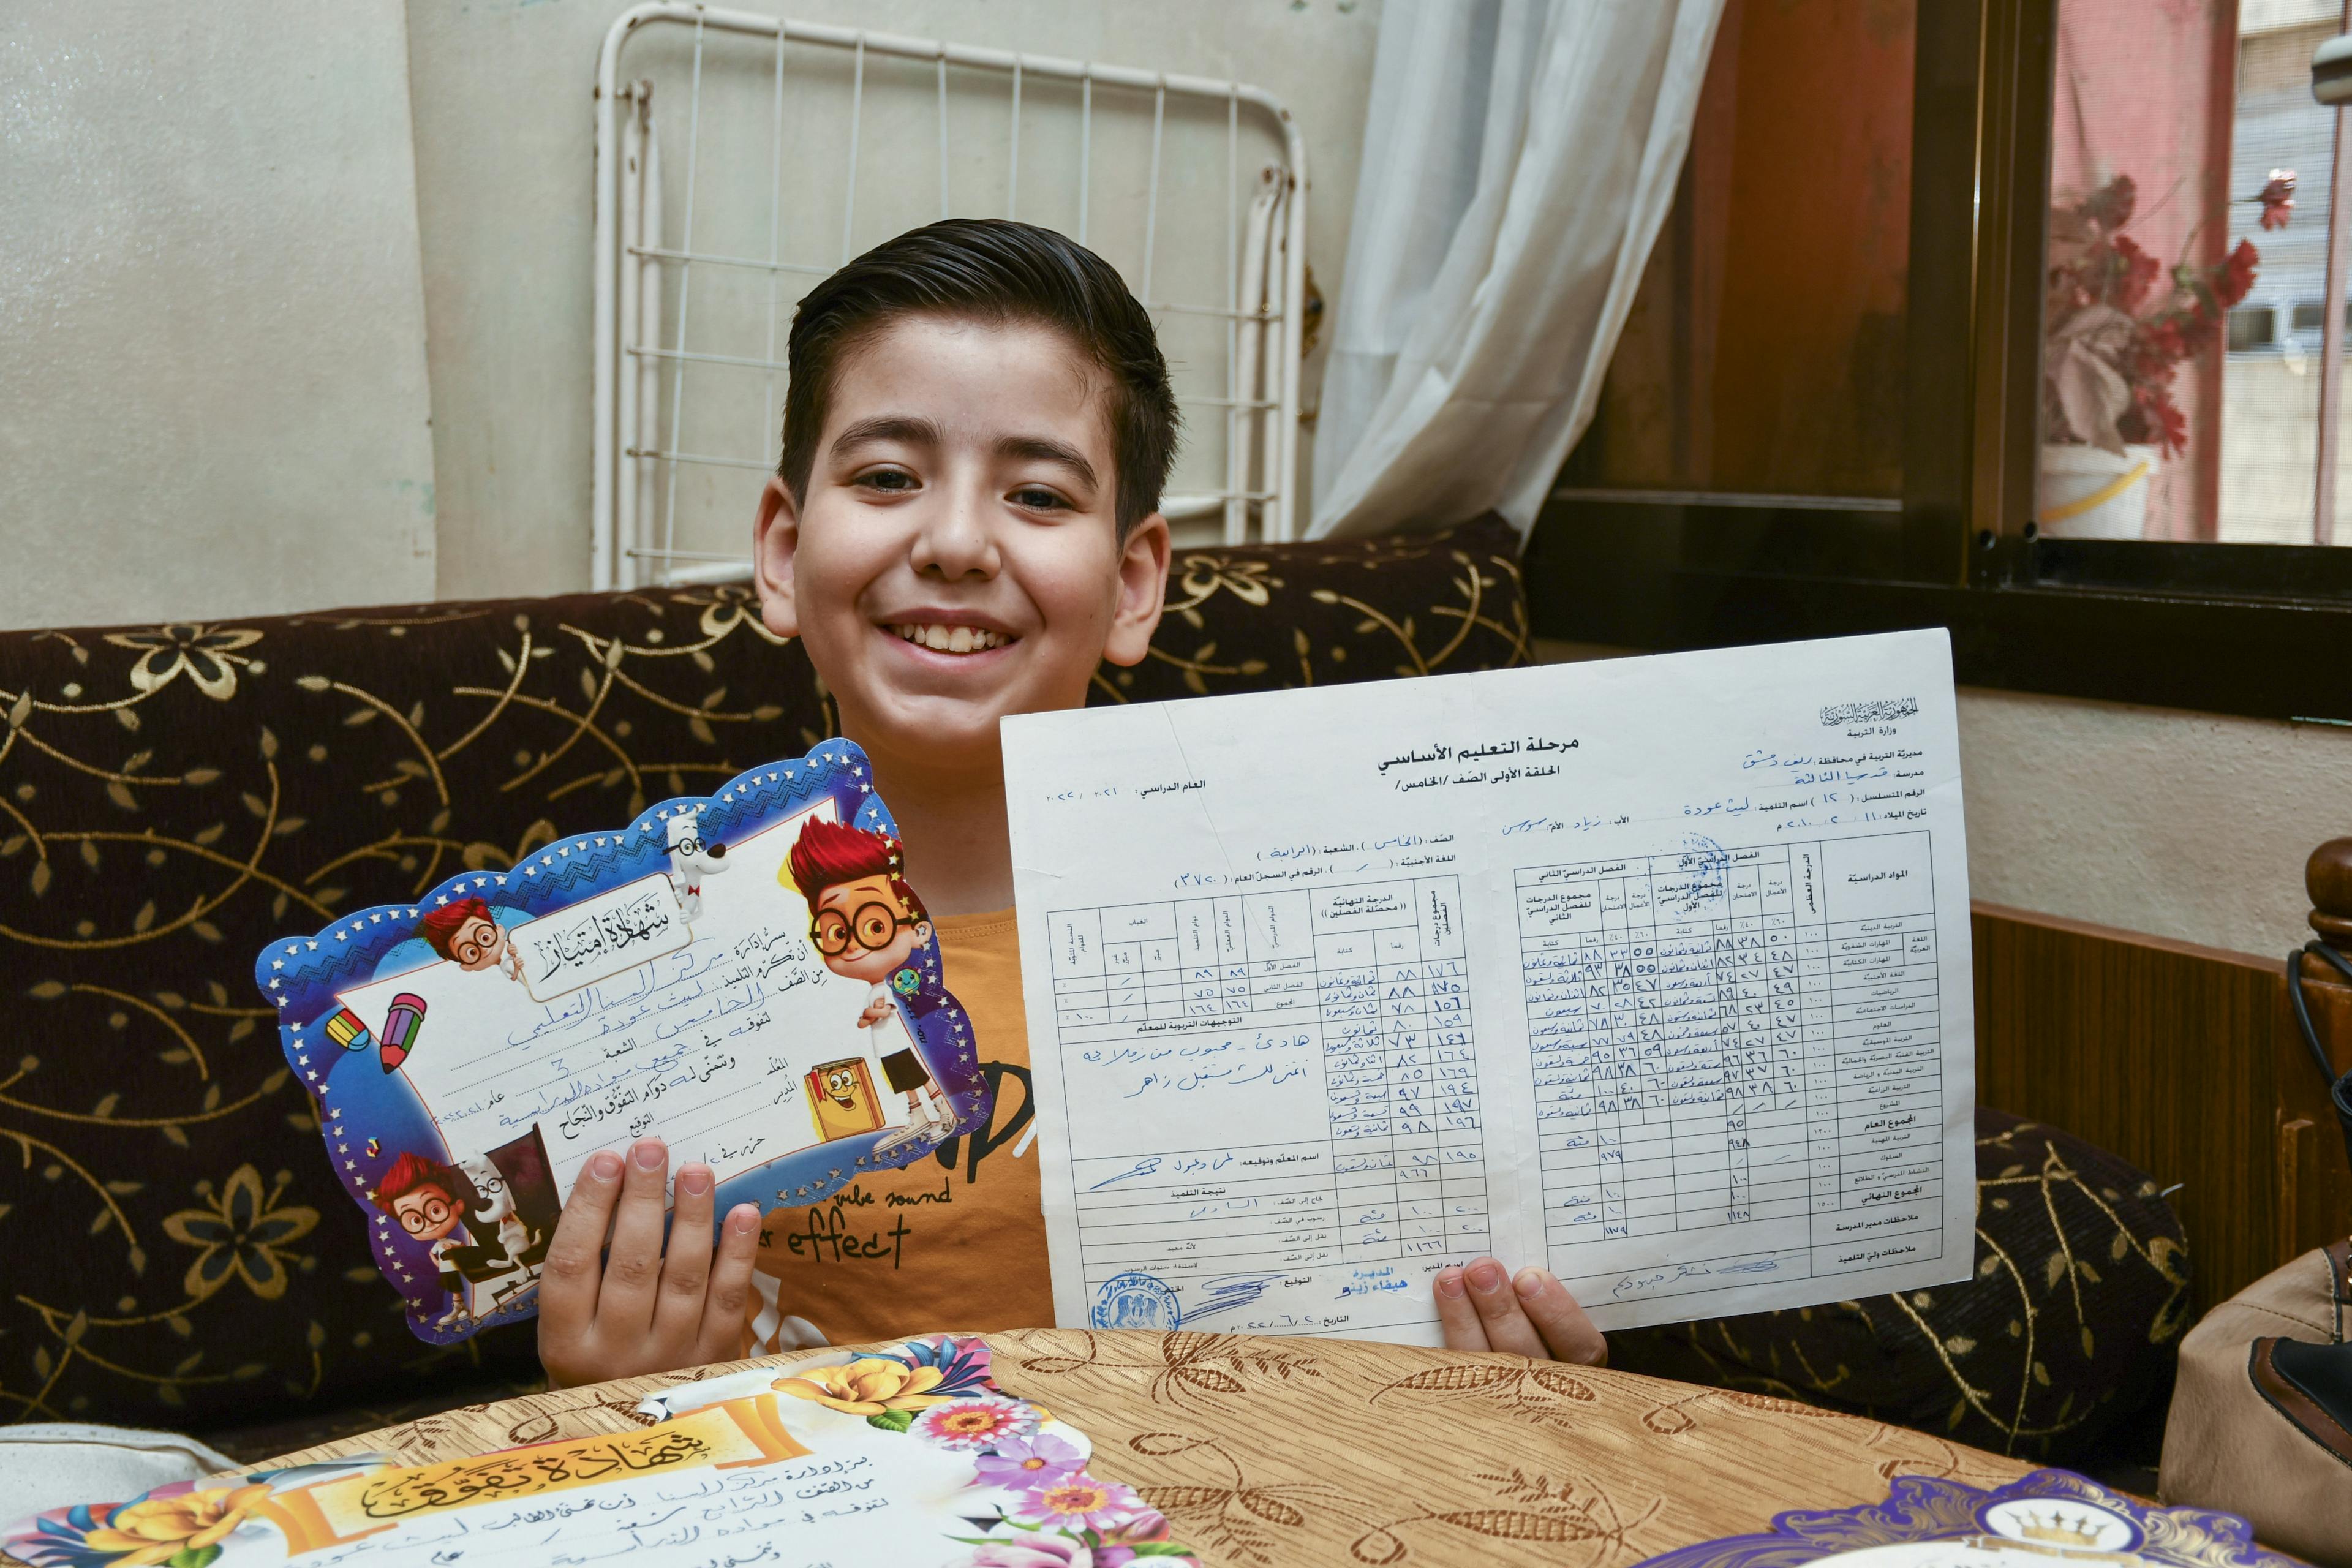 Laith proudly showing his excellent school grade report and certificates.